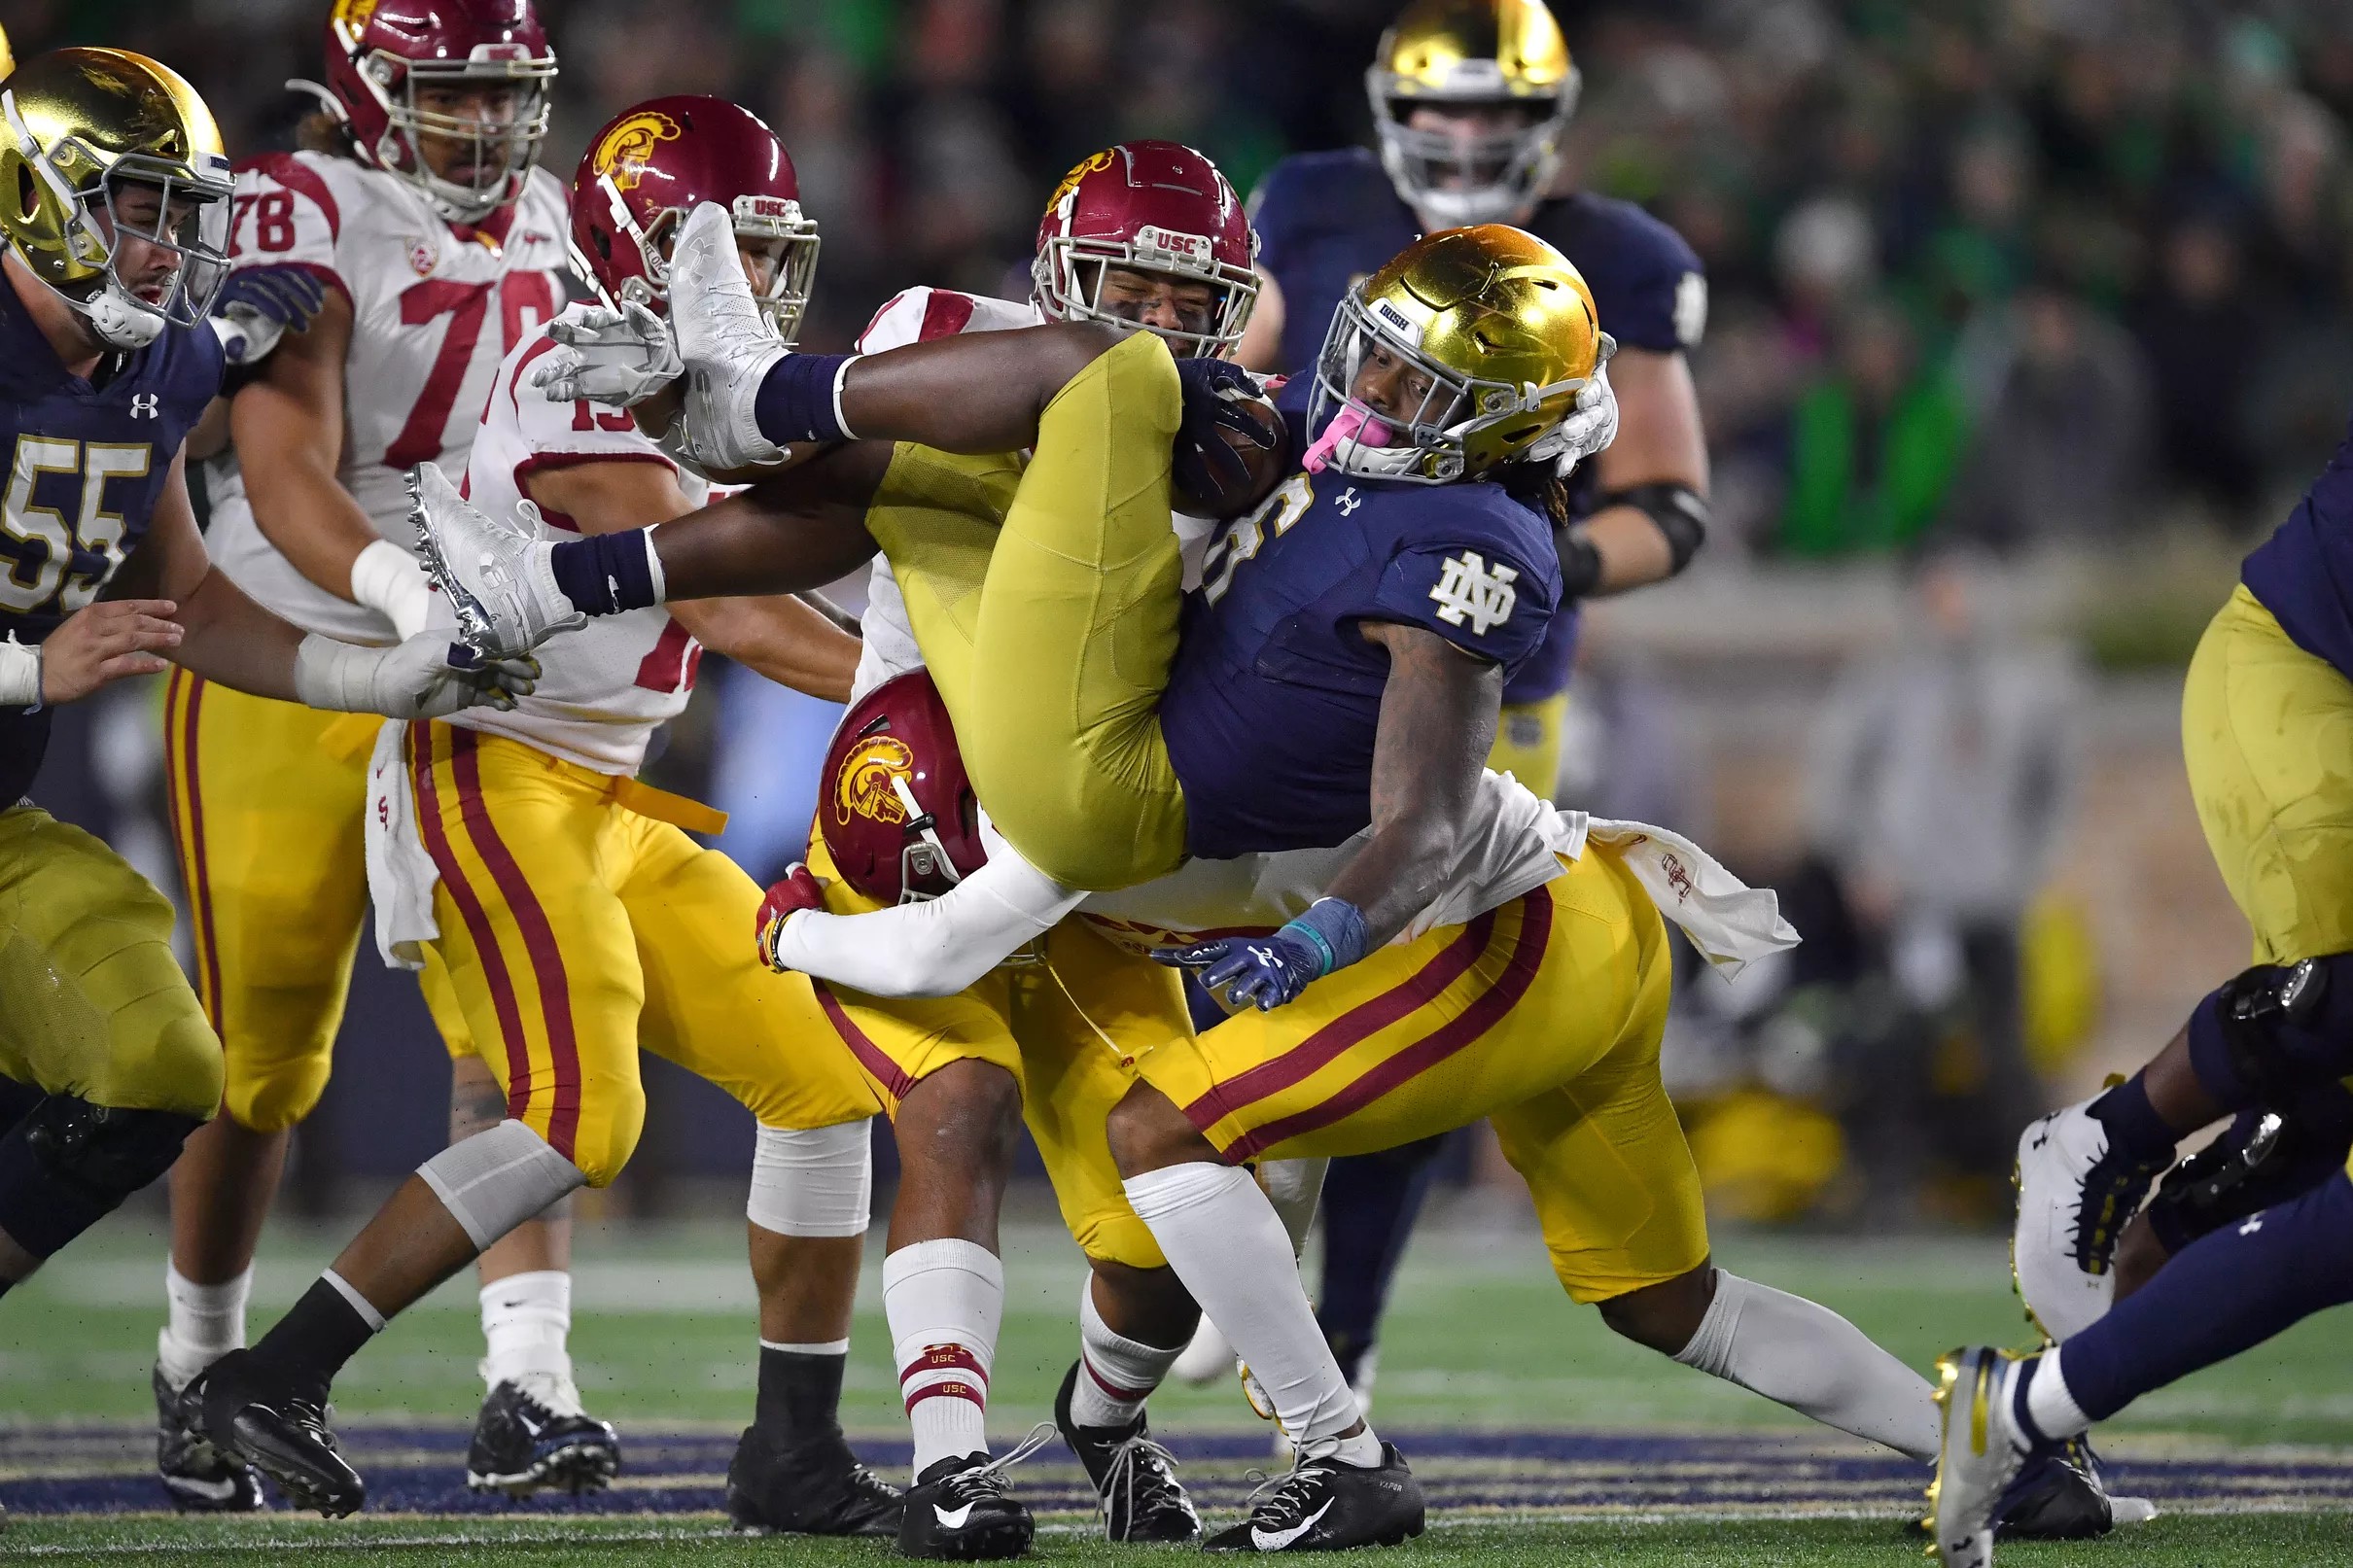 Notre Dame VS USC proved once again how tricky rivalry games can be